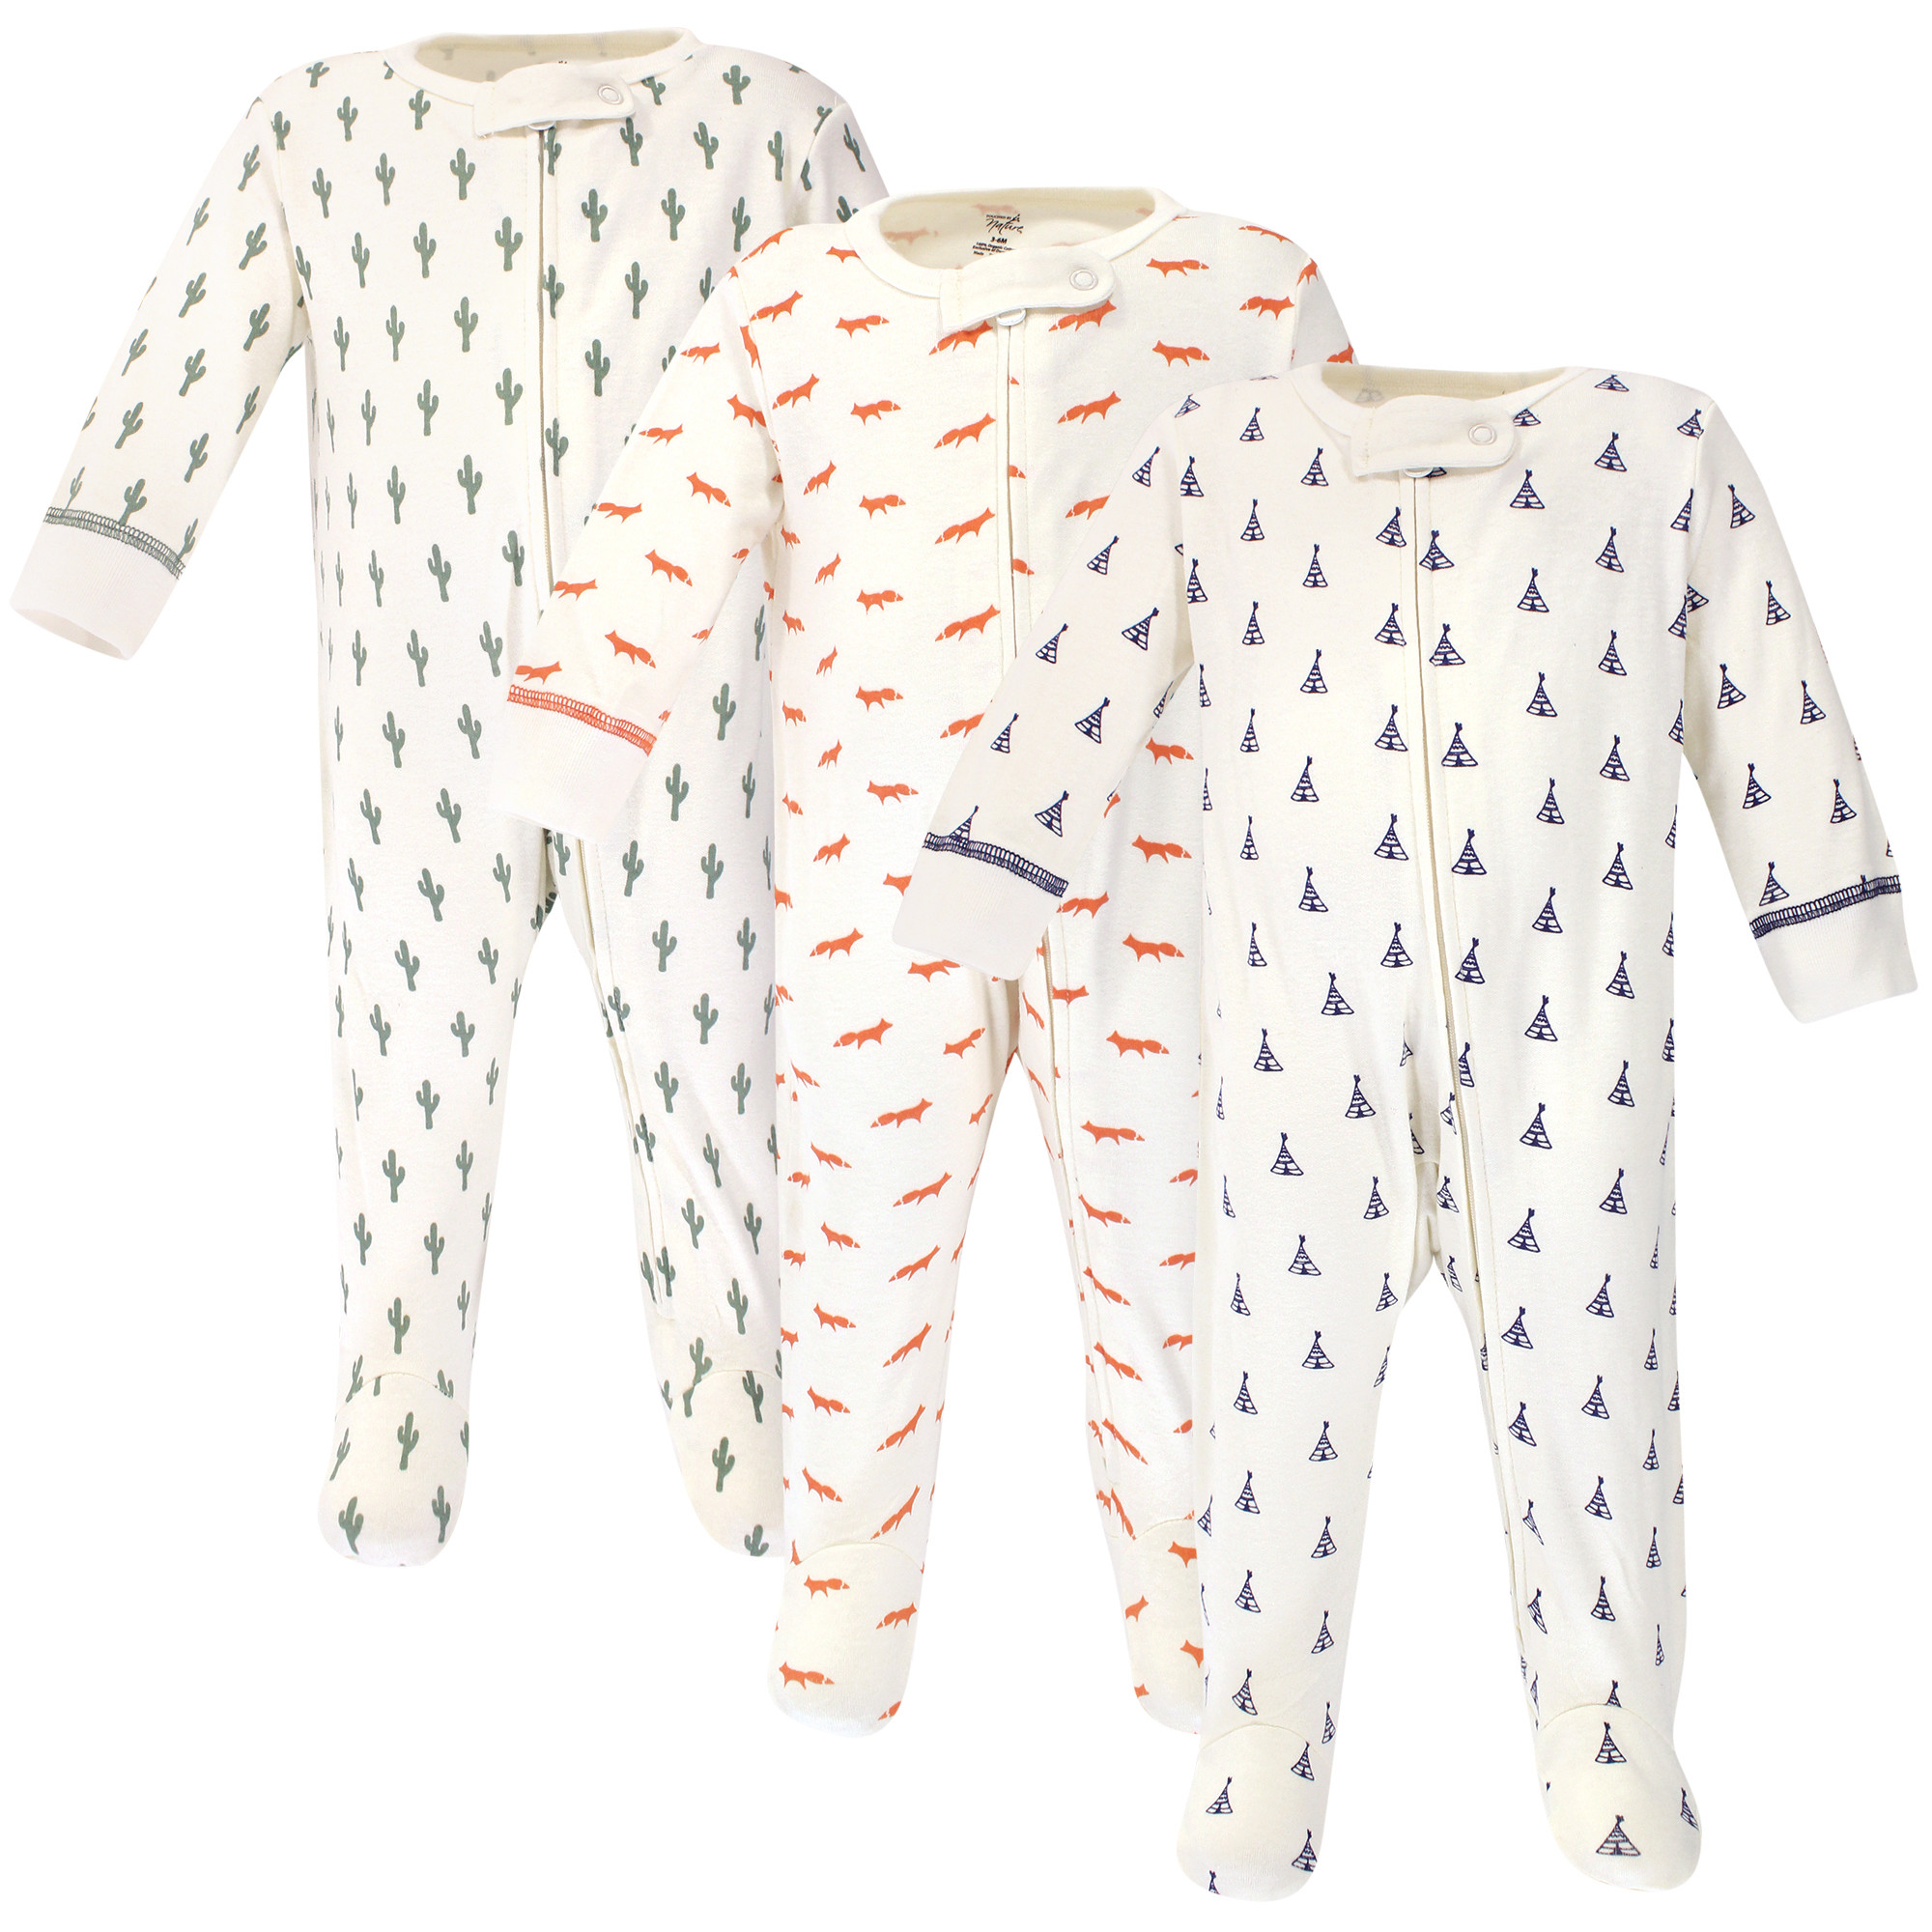 Touched by Nature Unisex-Baby Organic Cotton Sleep and Play 3 Pack Sleepers